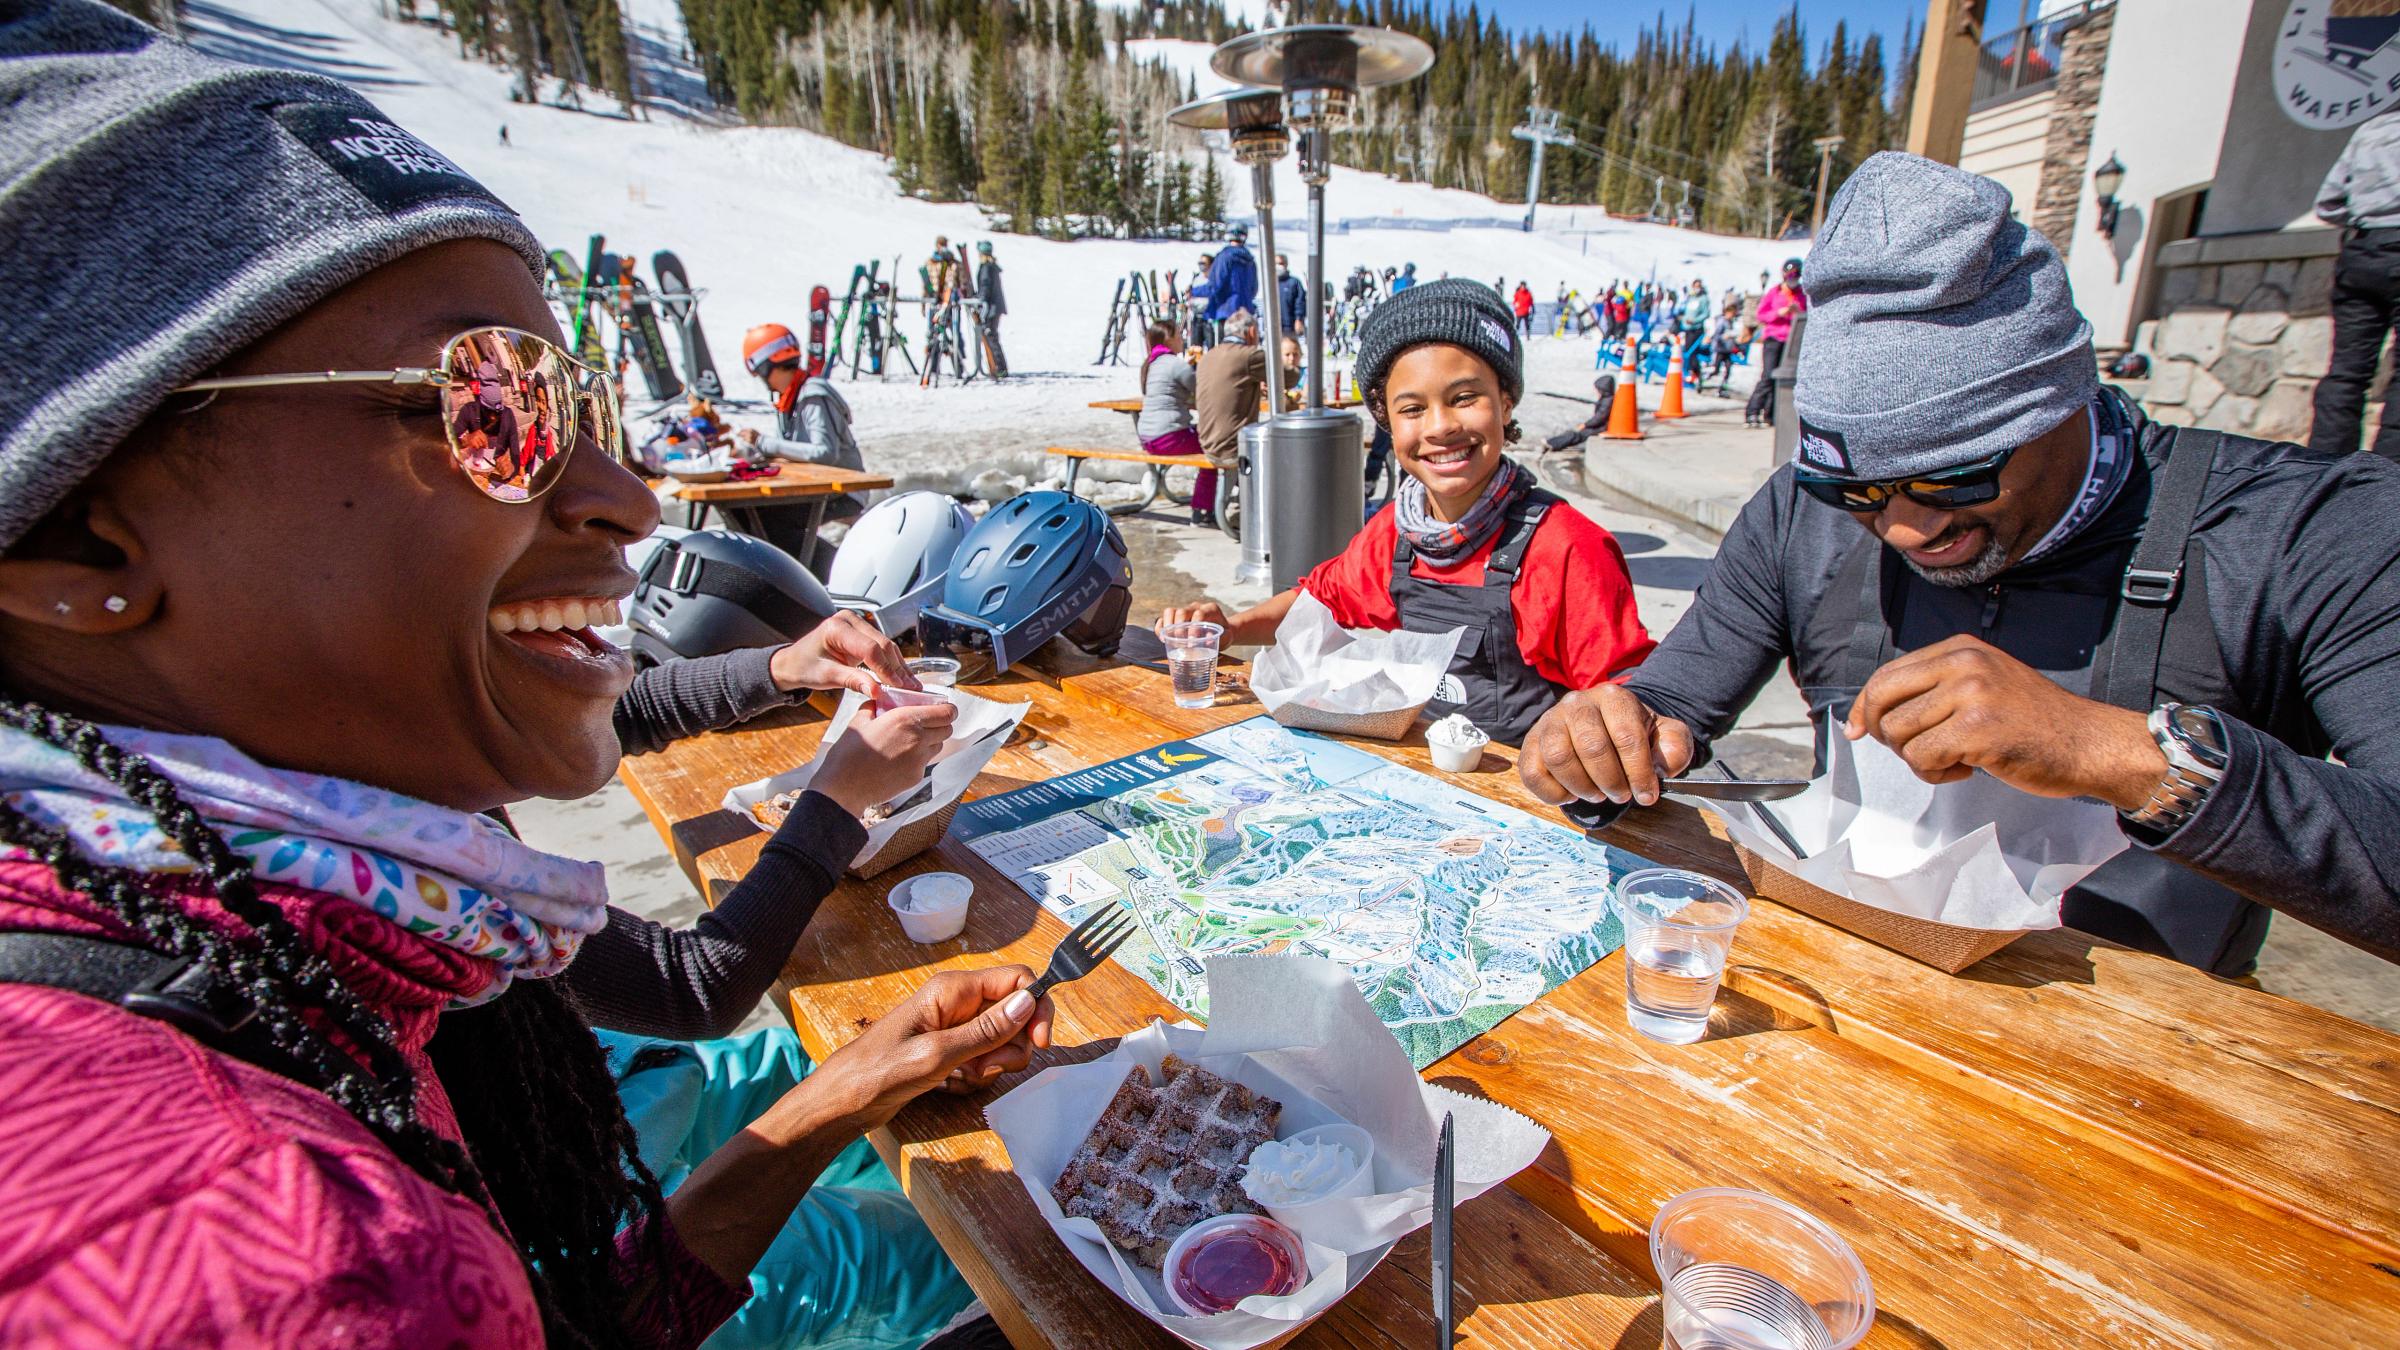 A family enjoys Little Dollie Waffles at Solitude Mountain Resort